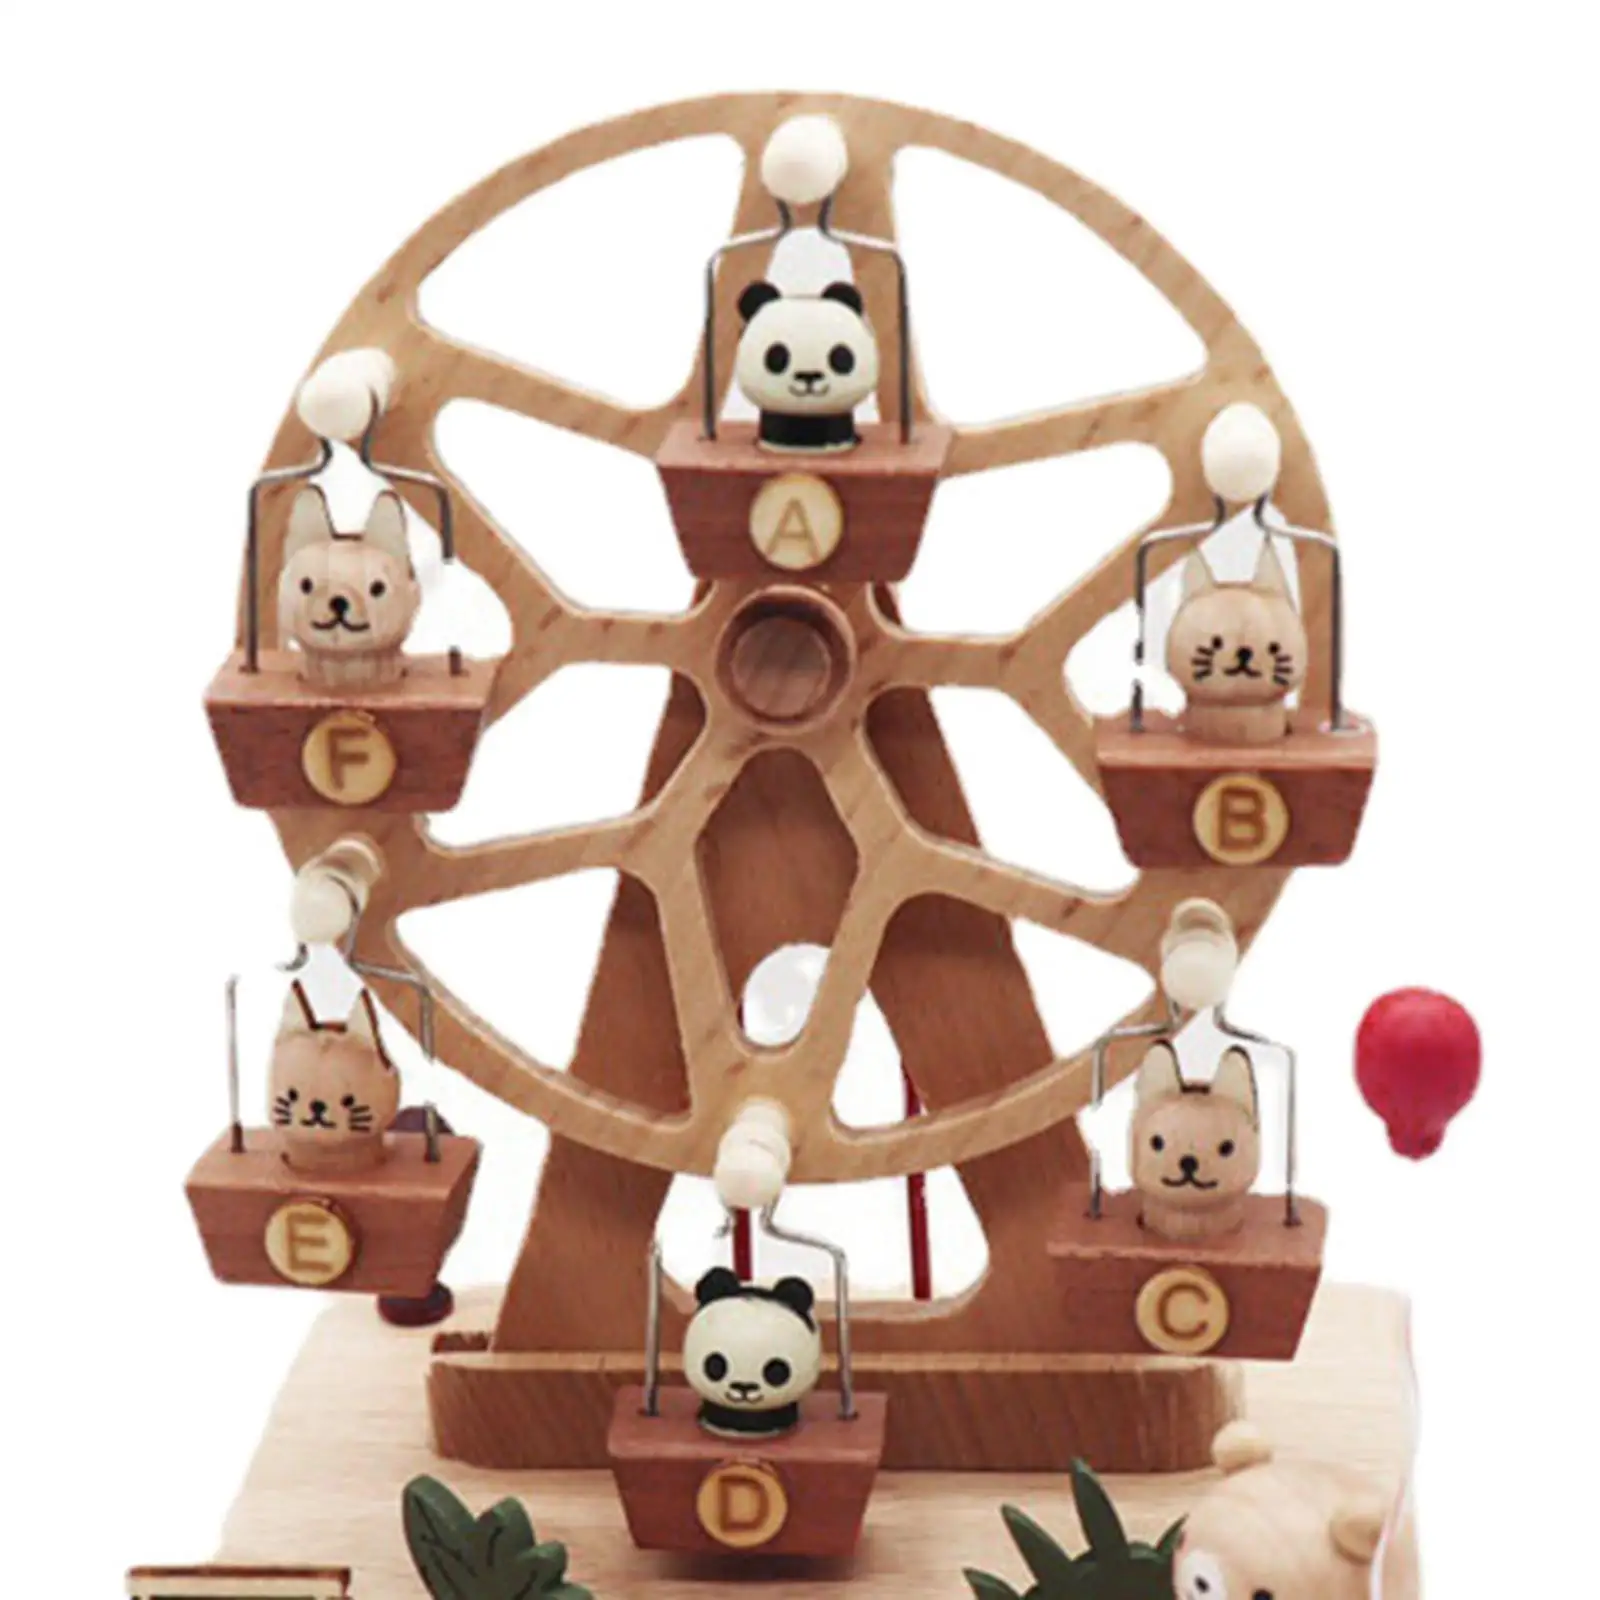 Carousel Music Box Ornament Children`s Toys Christmas Present for Family Friends with Small Swinging Animal Windmill Music Box